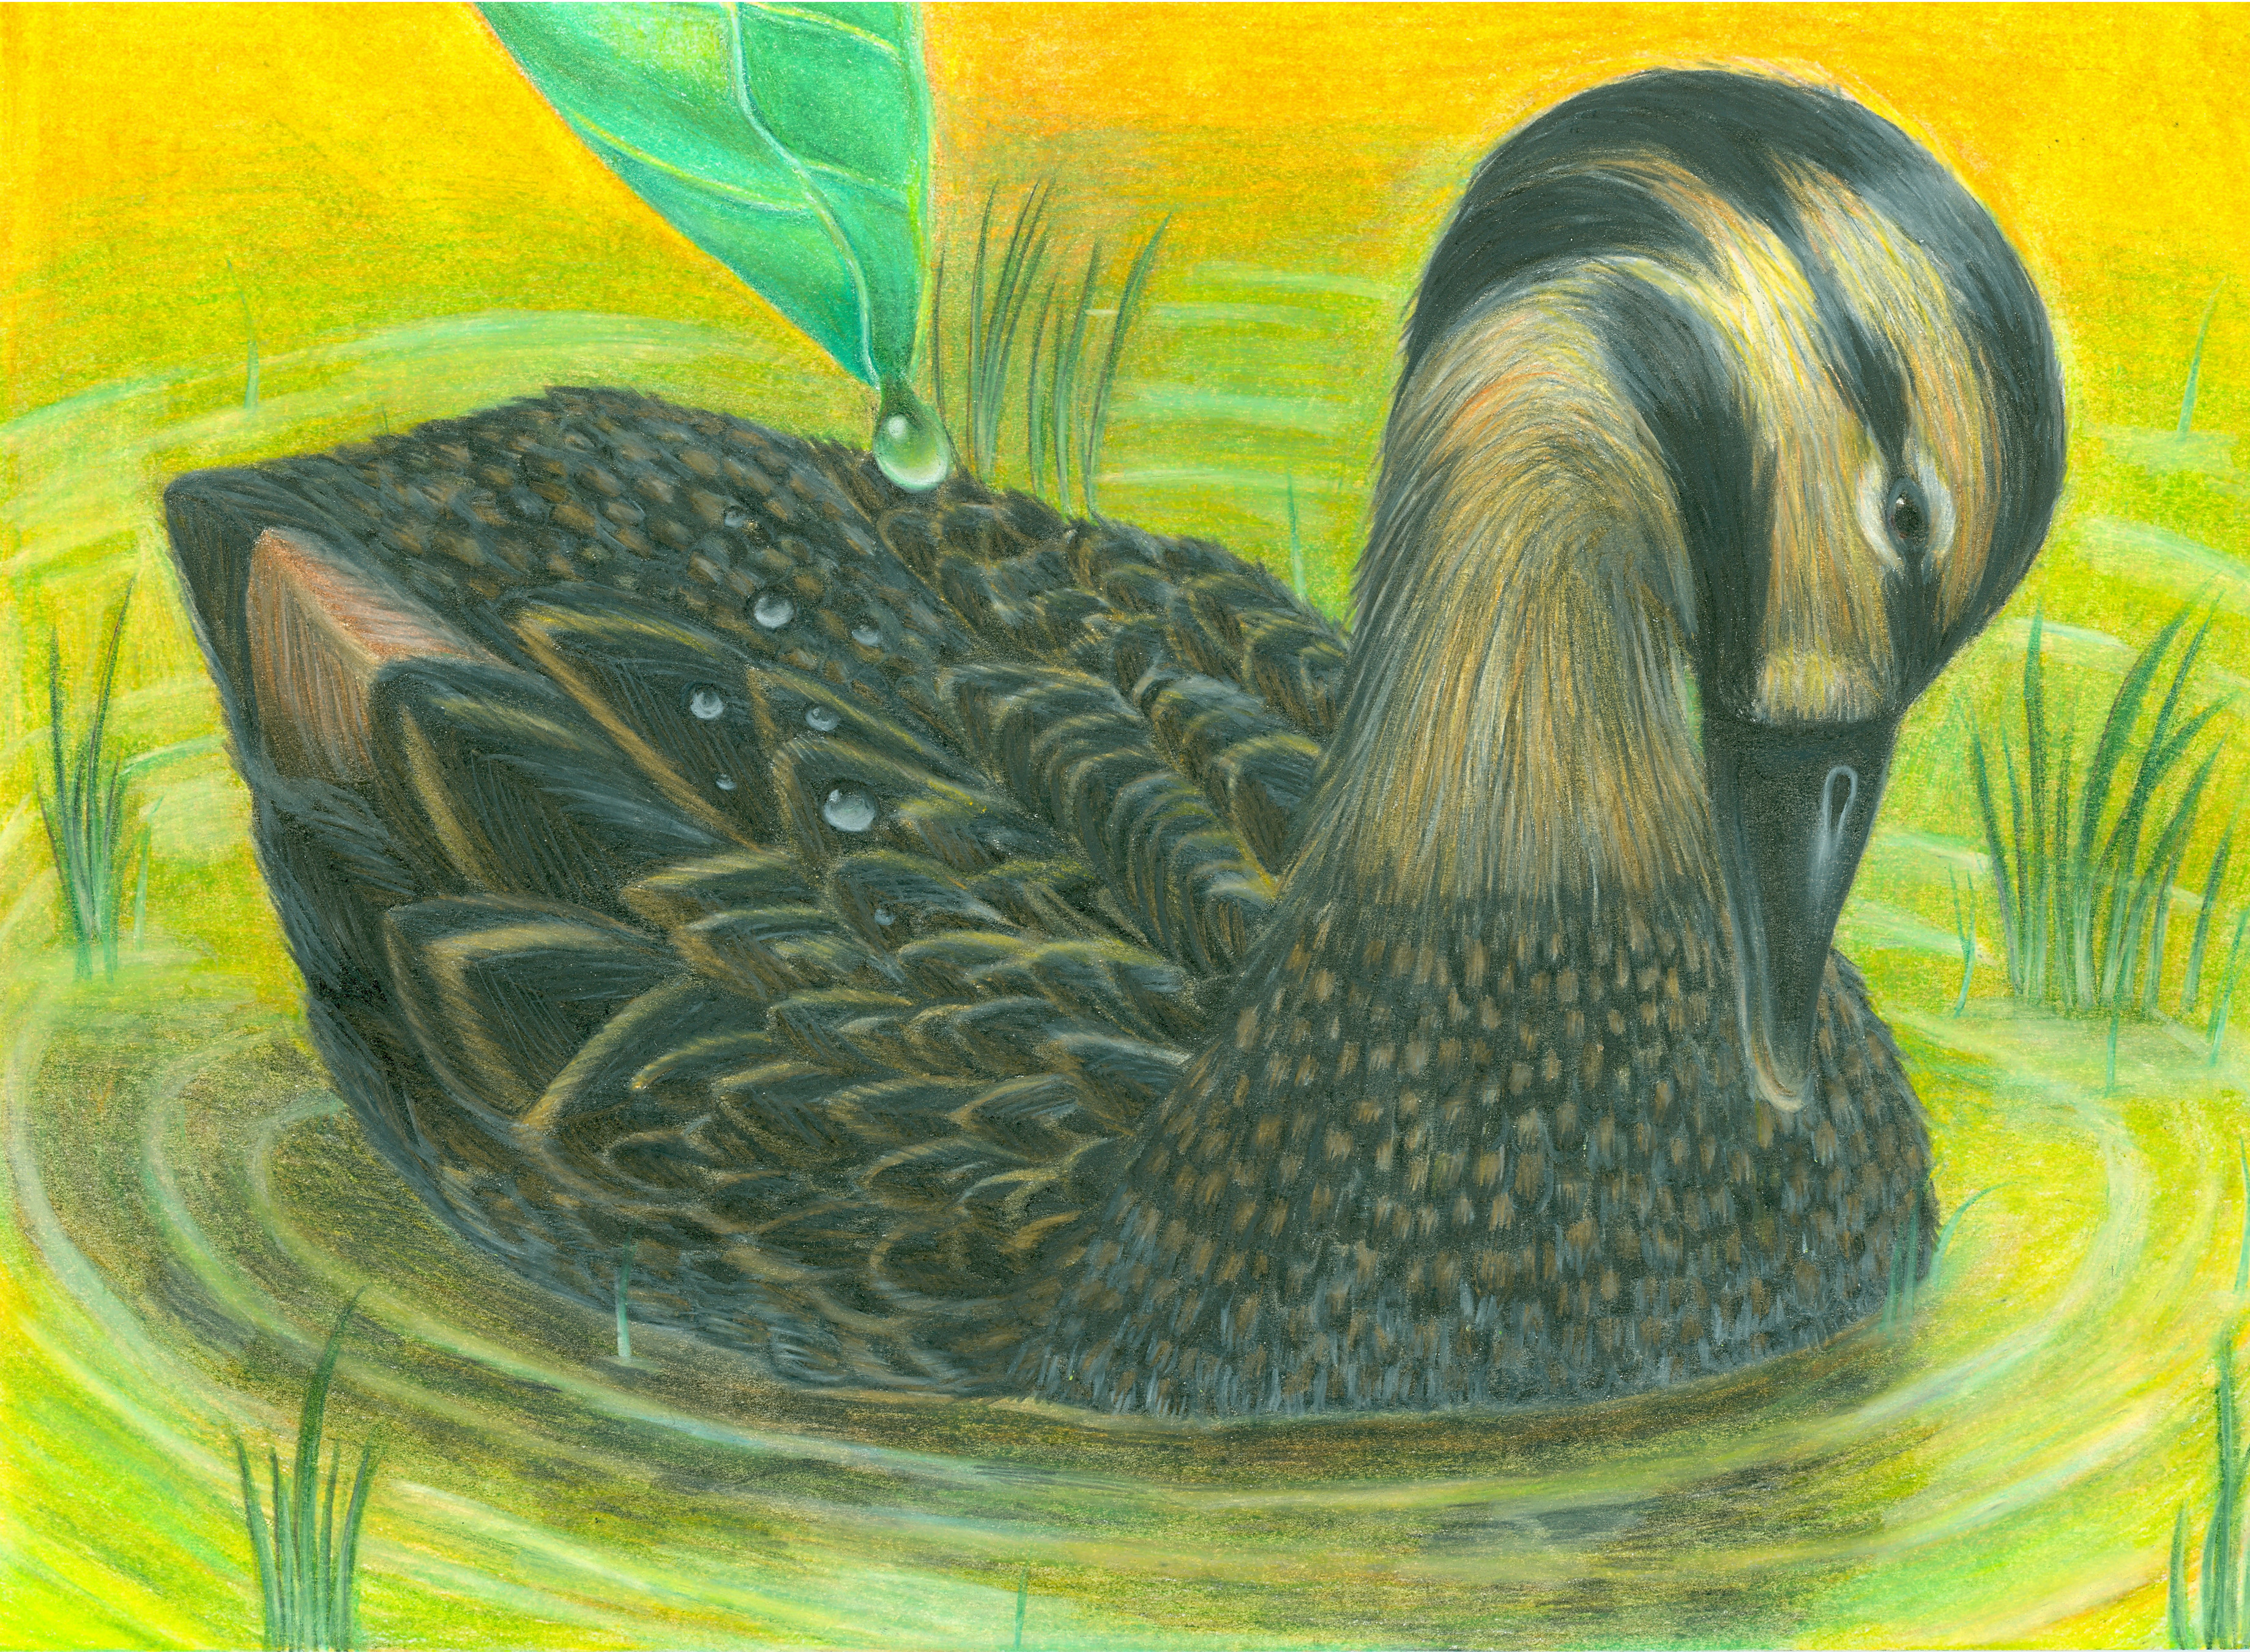 The finalist from Hawaii for the 2011 Junior Duck Stamp Art Contest. (5597880027)